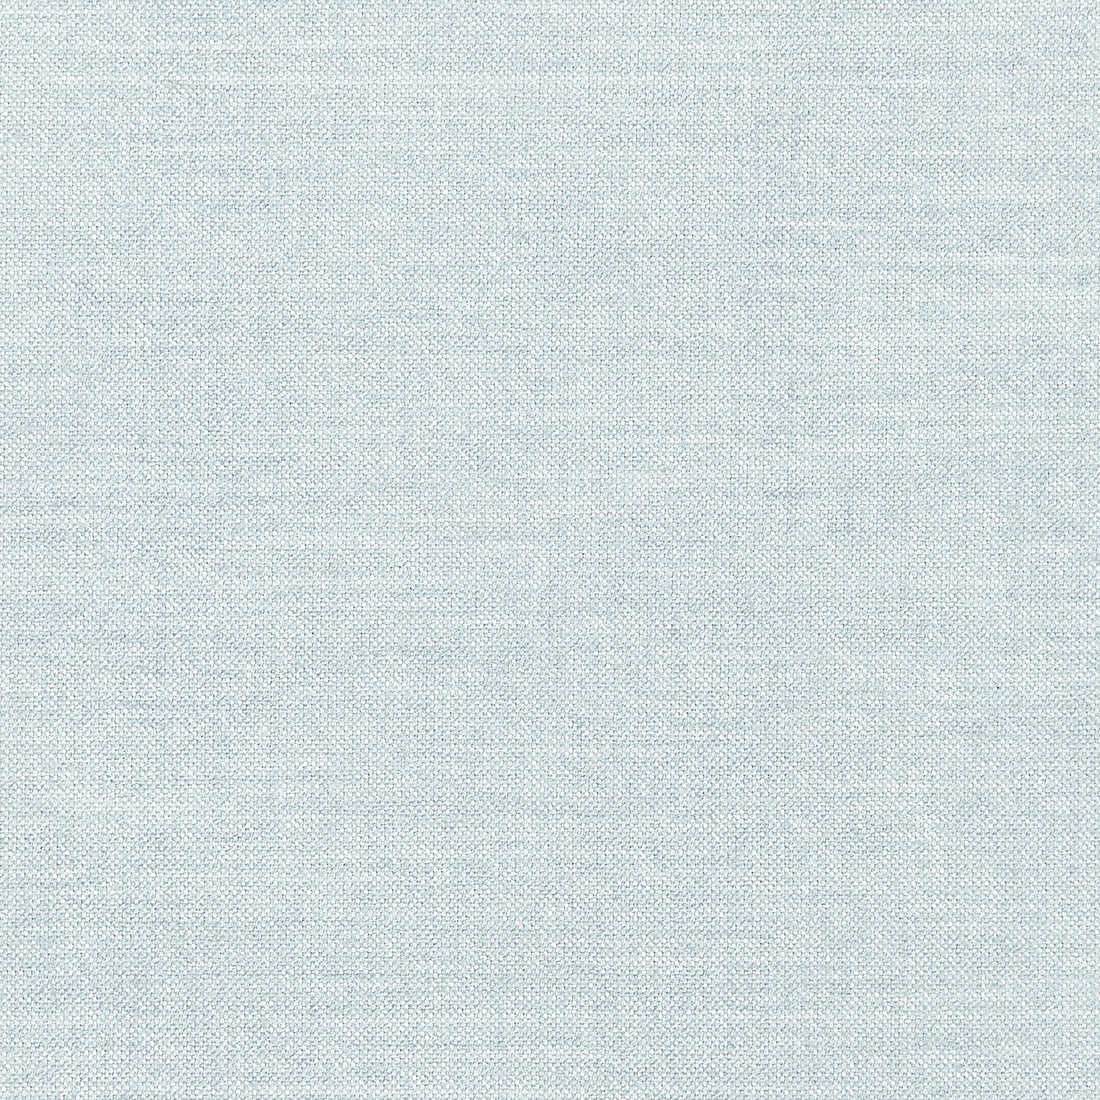 Aura fabric in ice blue color - pattern number W80239 - by Thibaut in the Kaleidoscope Fabrics collection